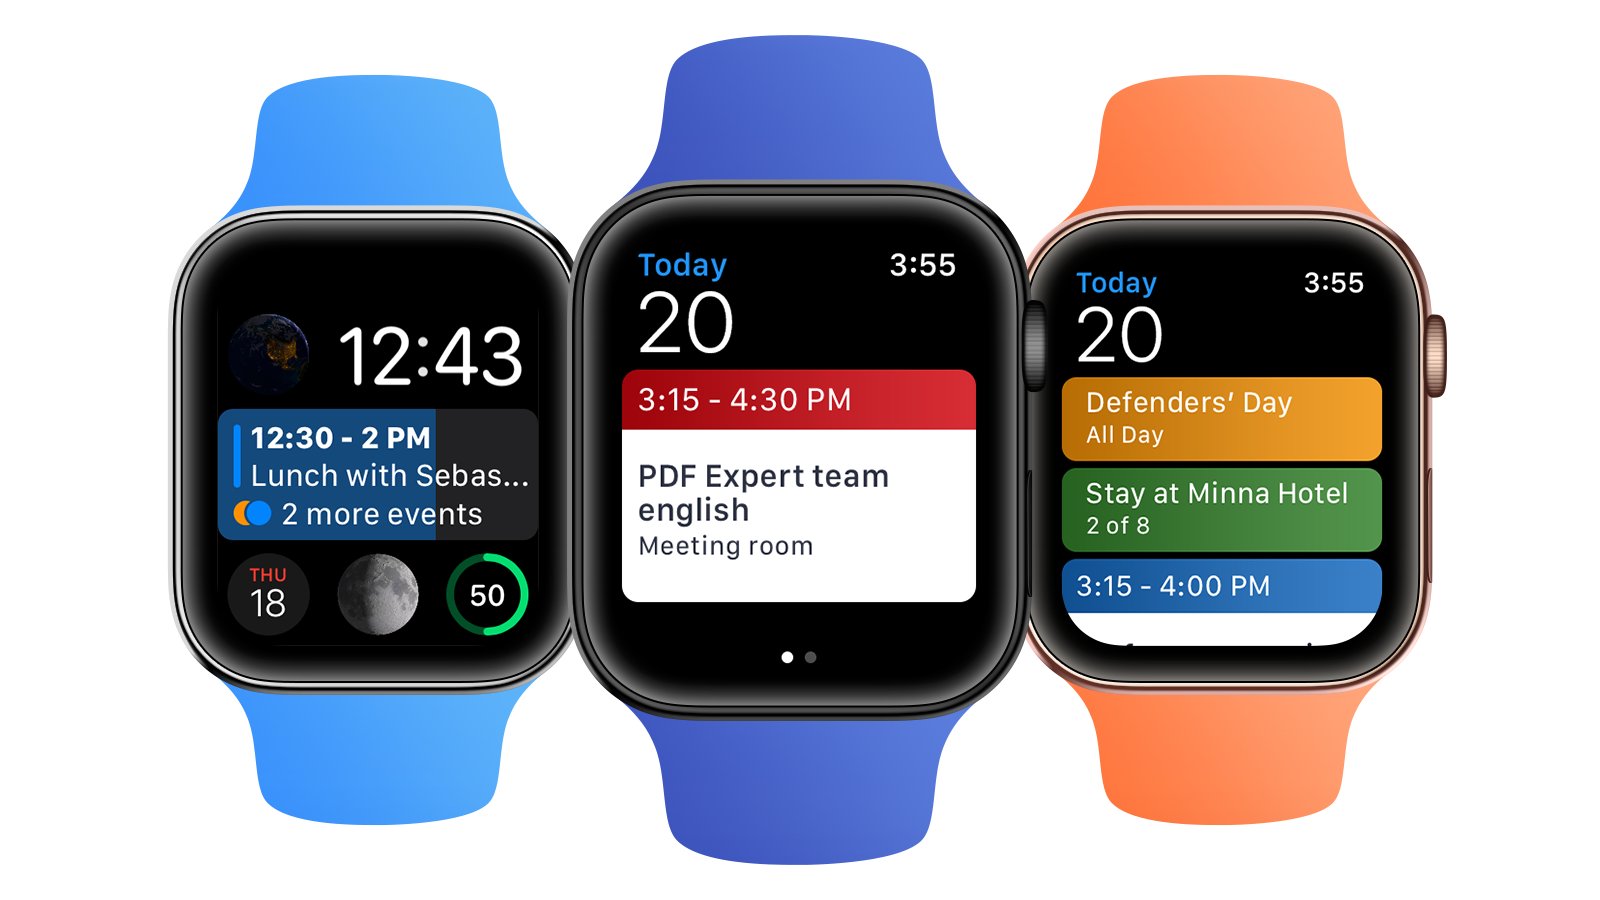 Readdle on Twitter "Here is how to install the Calendars Apple Watch